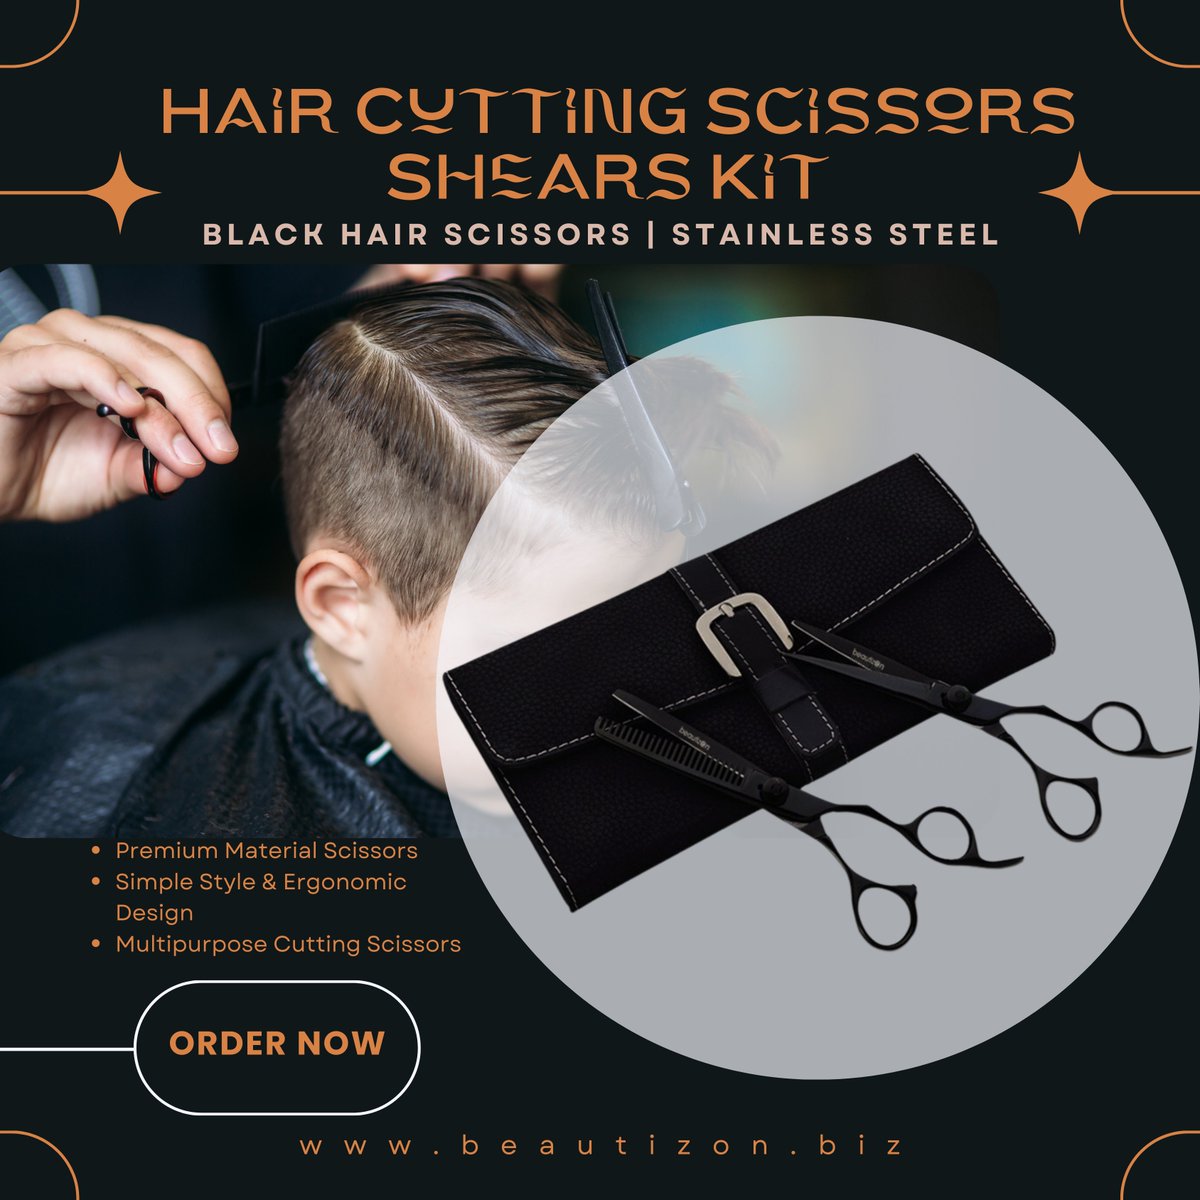 Upgrade your hair cutting game with our premium hair shears set!
#hairshears #hairshearsset #haircutting #haircuttingtools #haircuttinggame #hairdressing #hairdressertools #hairdresserlife #hairstyling #hairstylingtools